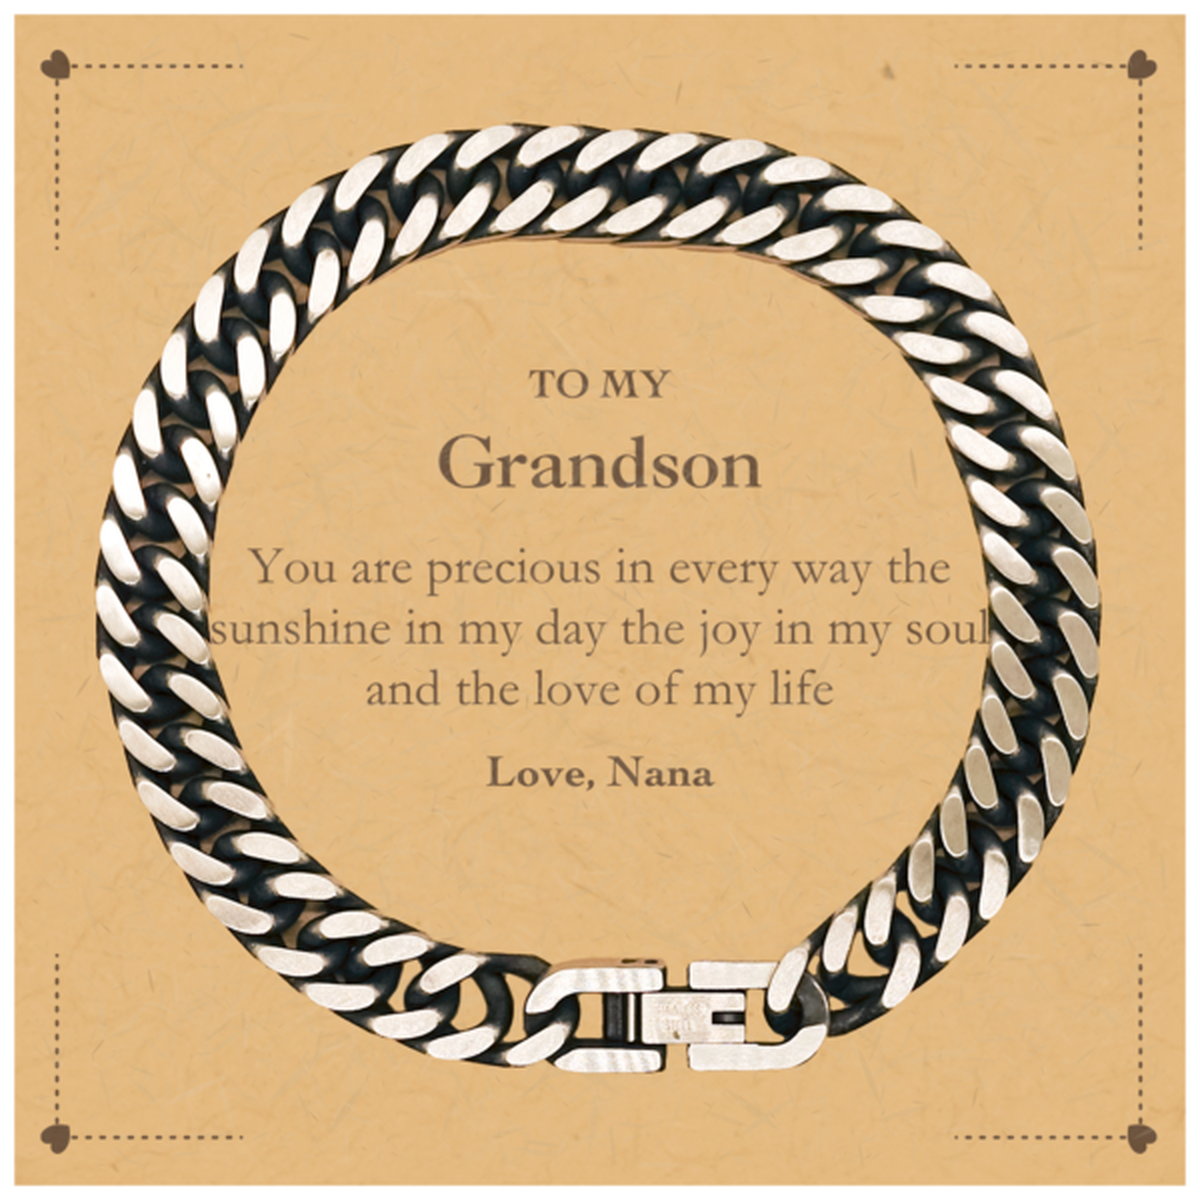 Graduation Gifts for Grandson Cuban Link Chain Bracelet Present from Nana, Christmas Grandson Birthday Gifts Grandson You are precious in every way the sunshine in my day. Love, Nana